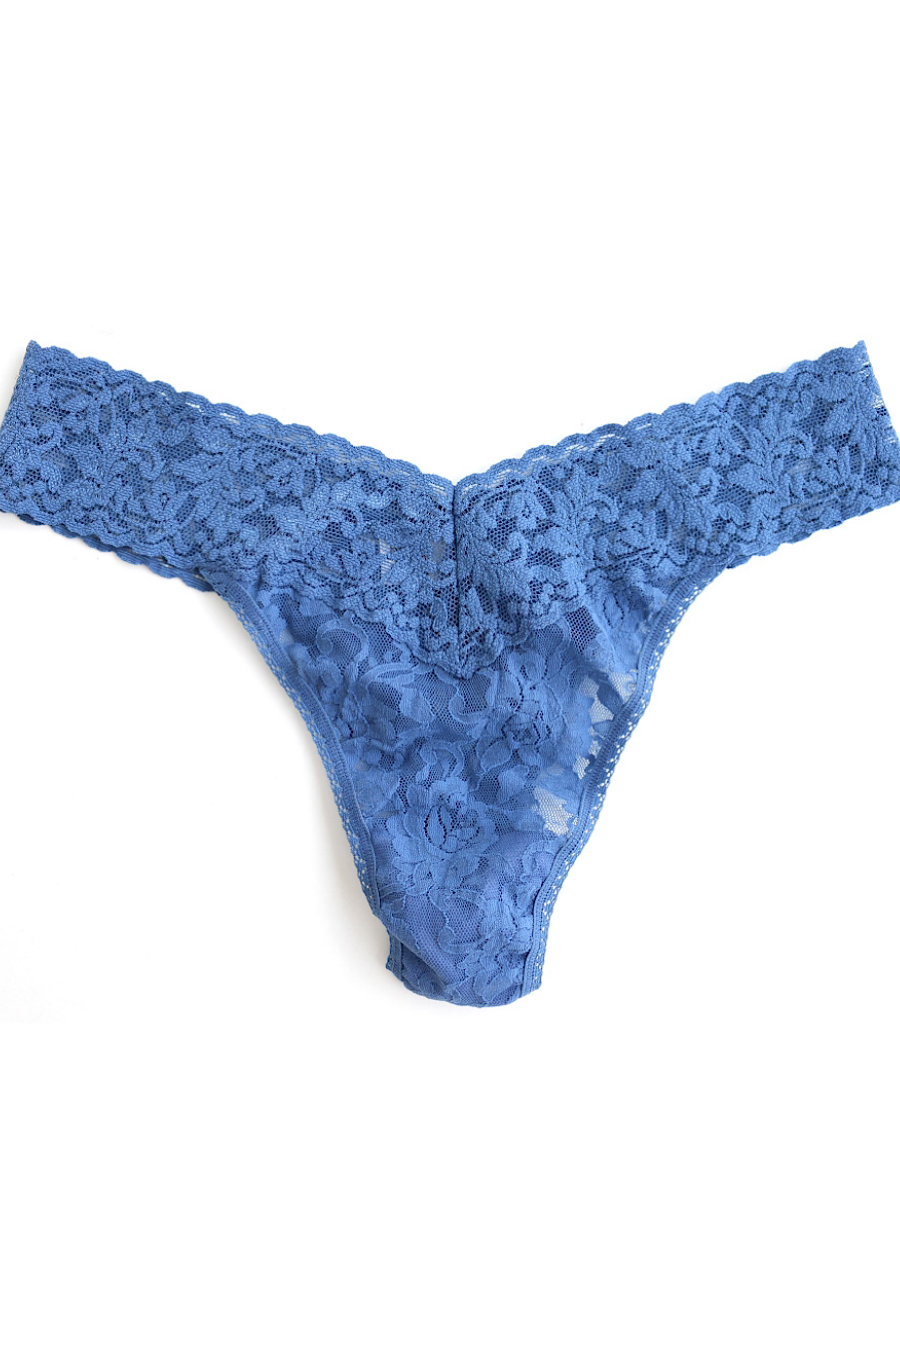 Hanky Panky Lace Original Rise Thong in Several Colors